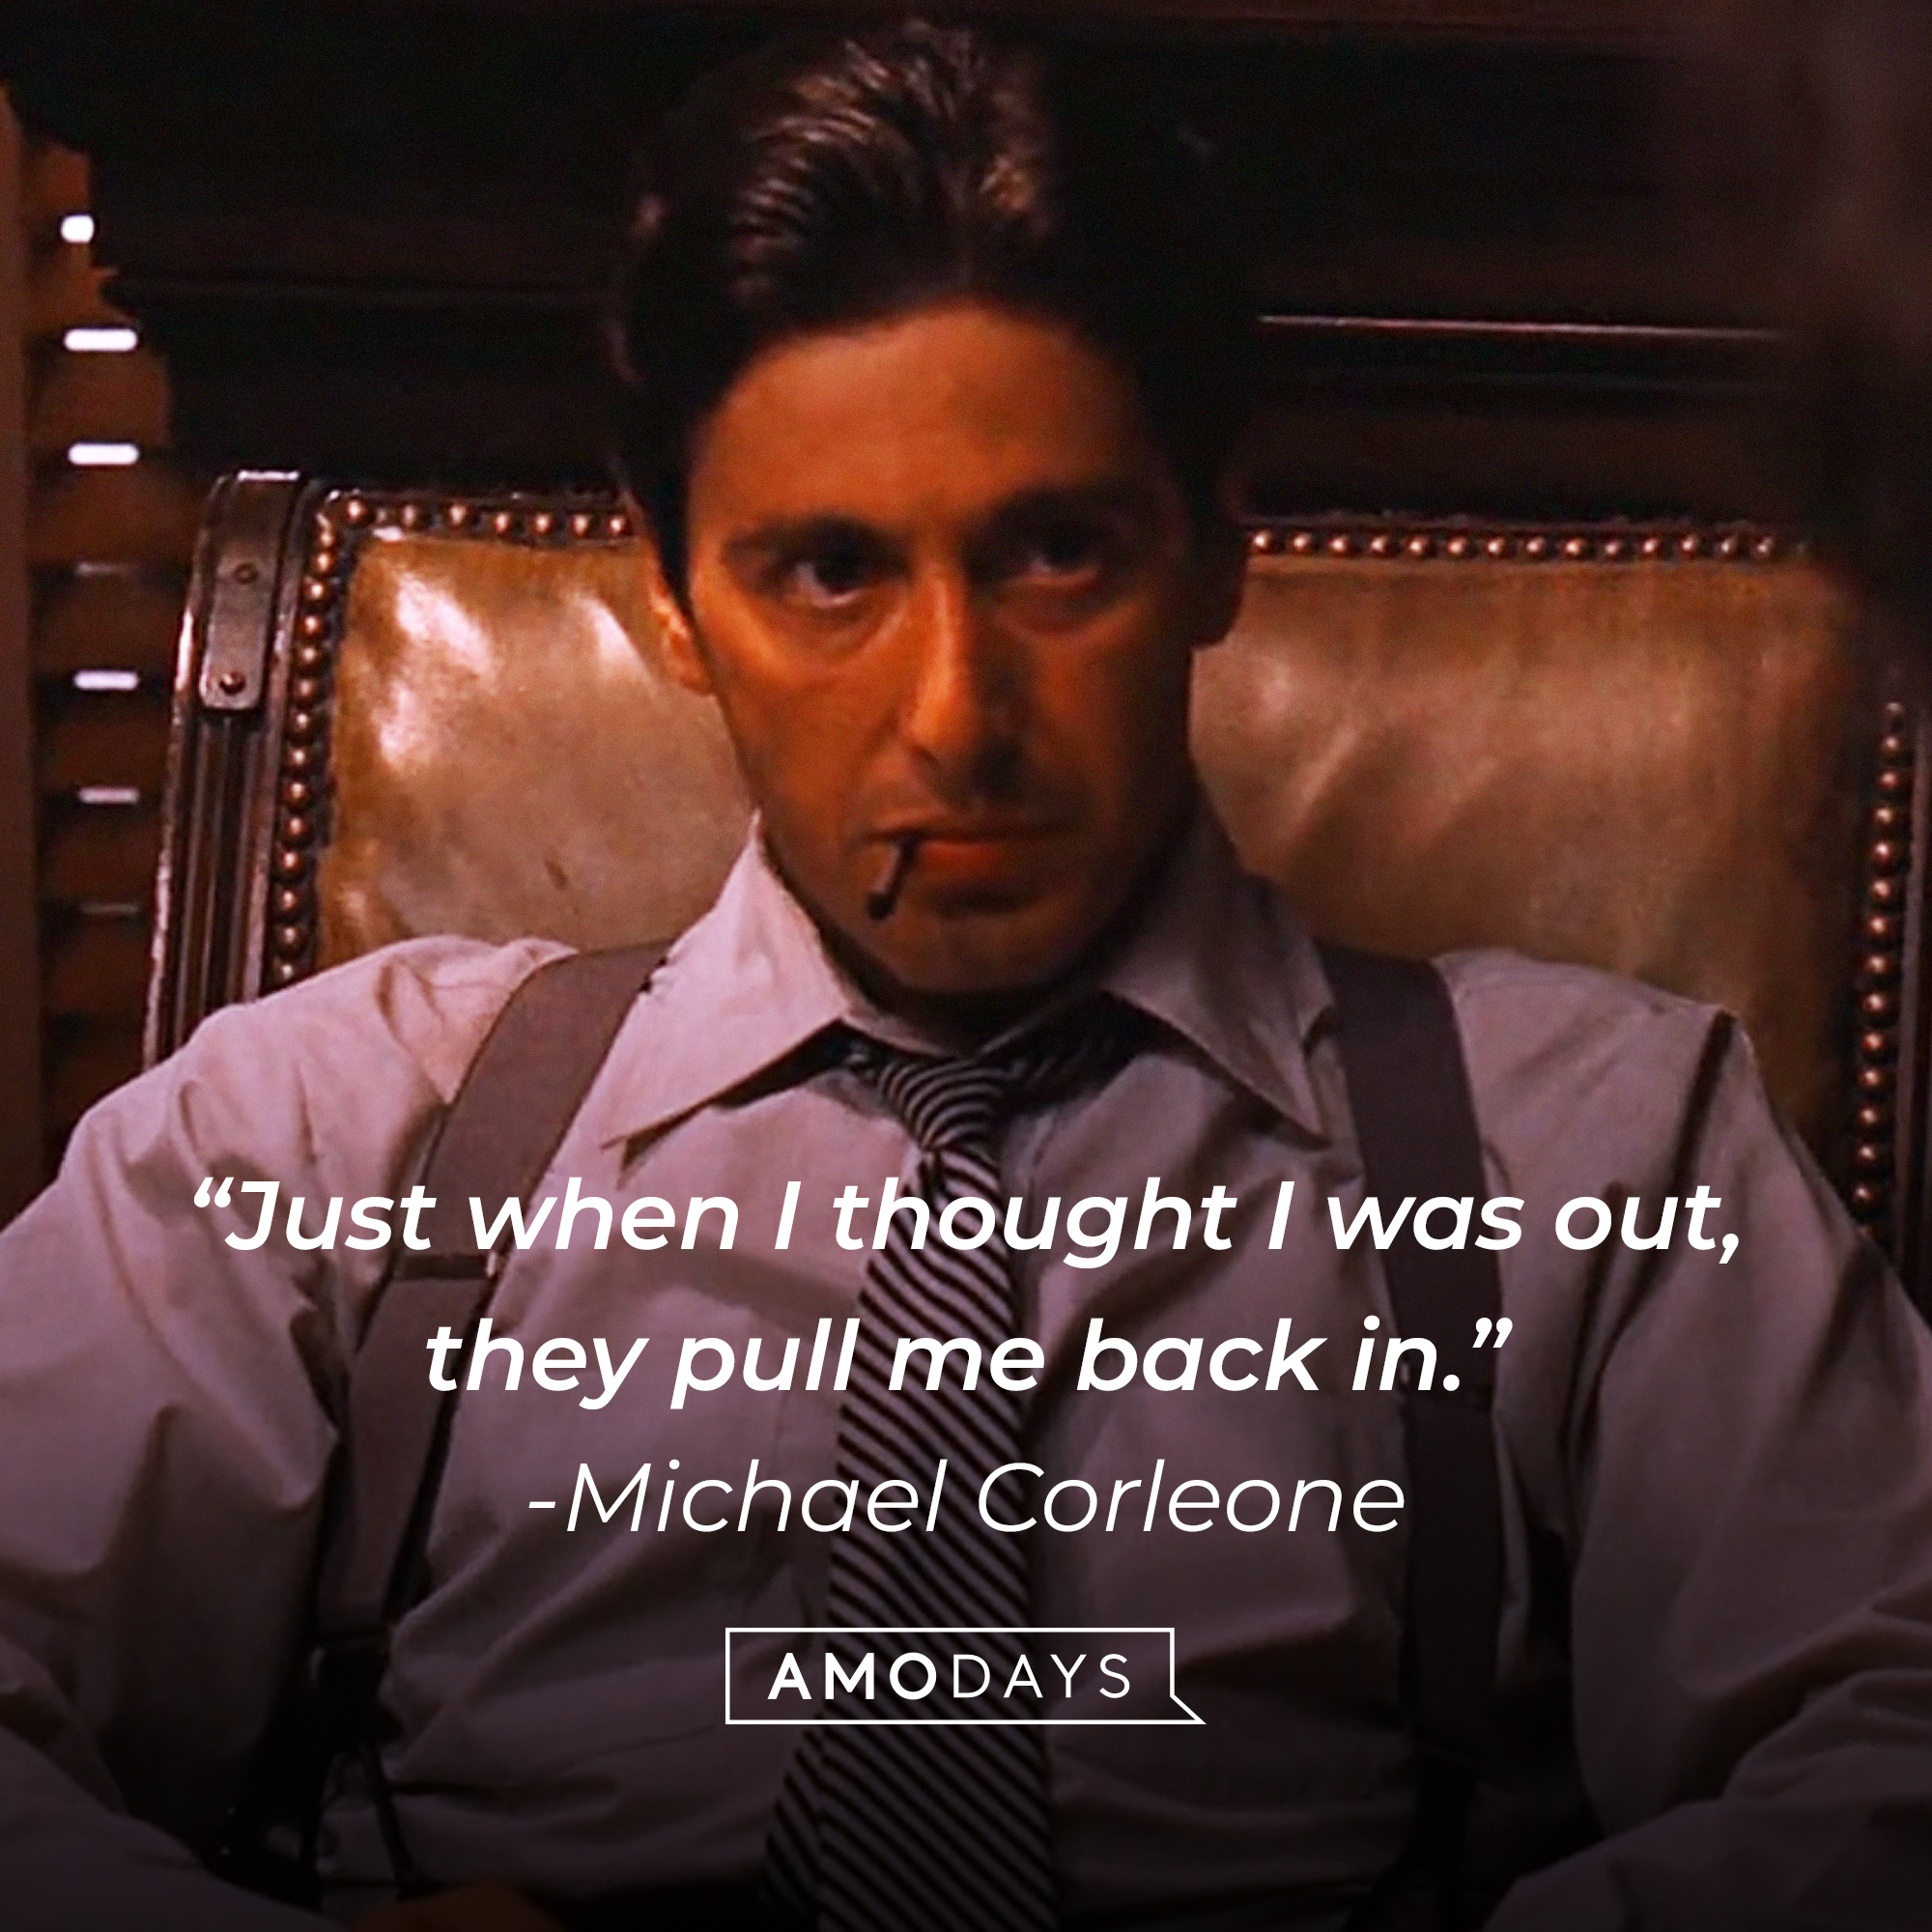 Michael Corleone's quote: "Just when I thought I was out, they pull me back in." | Source: Facebook/thegodfather